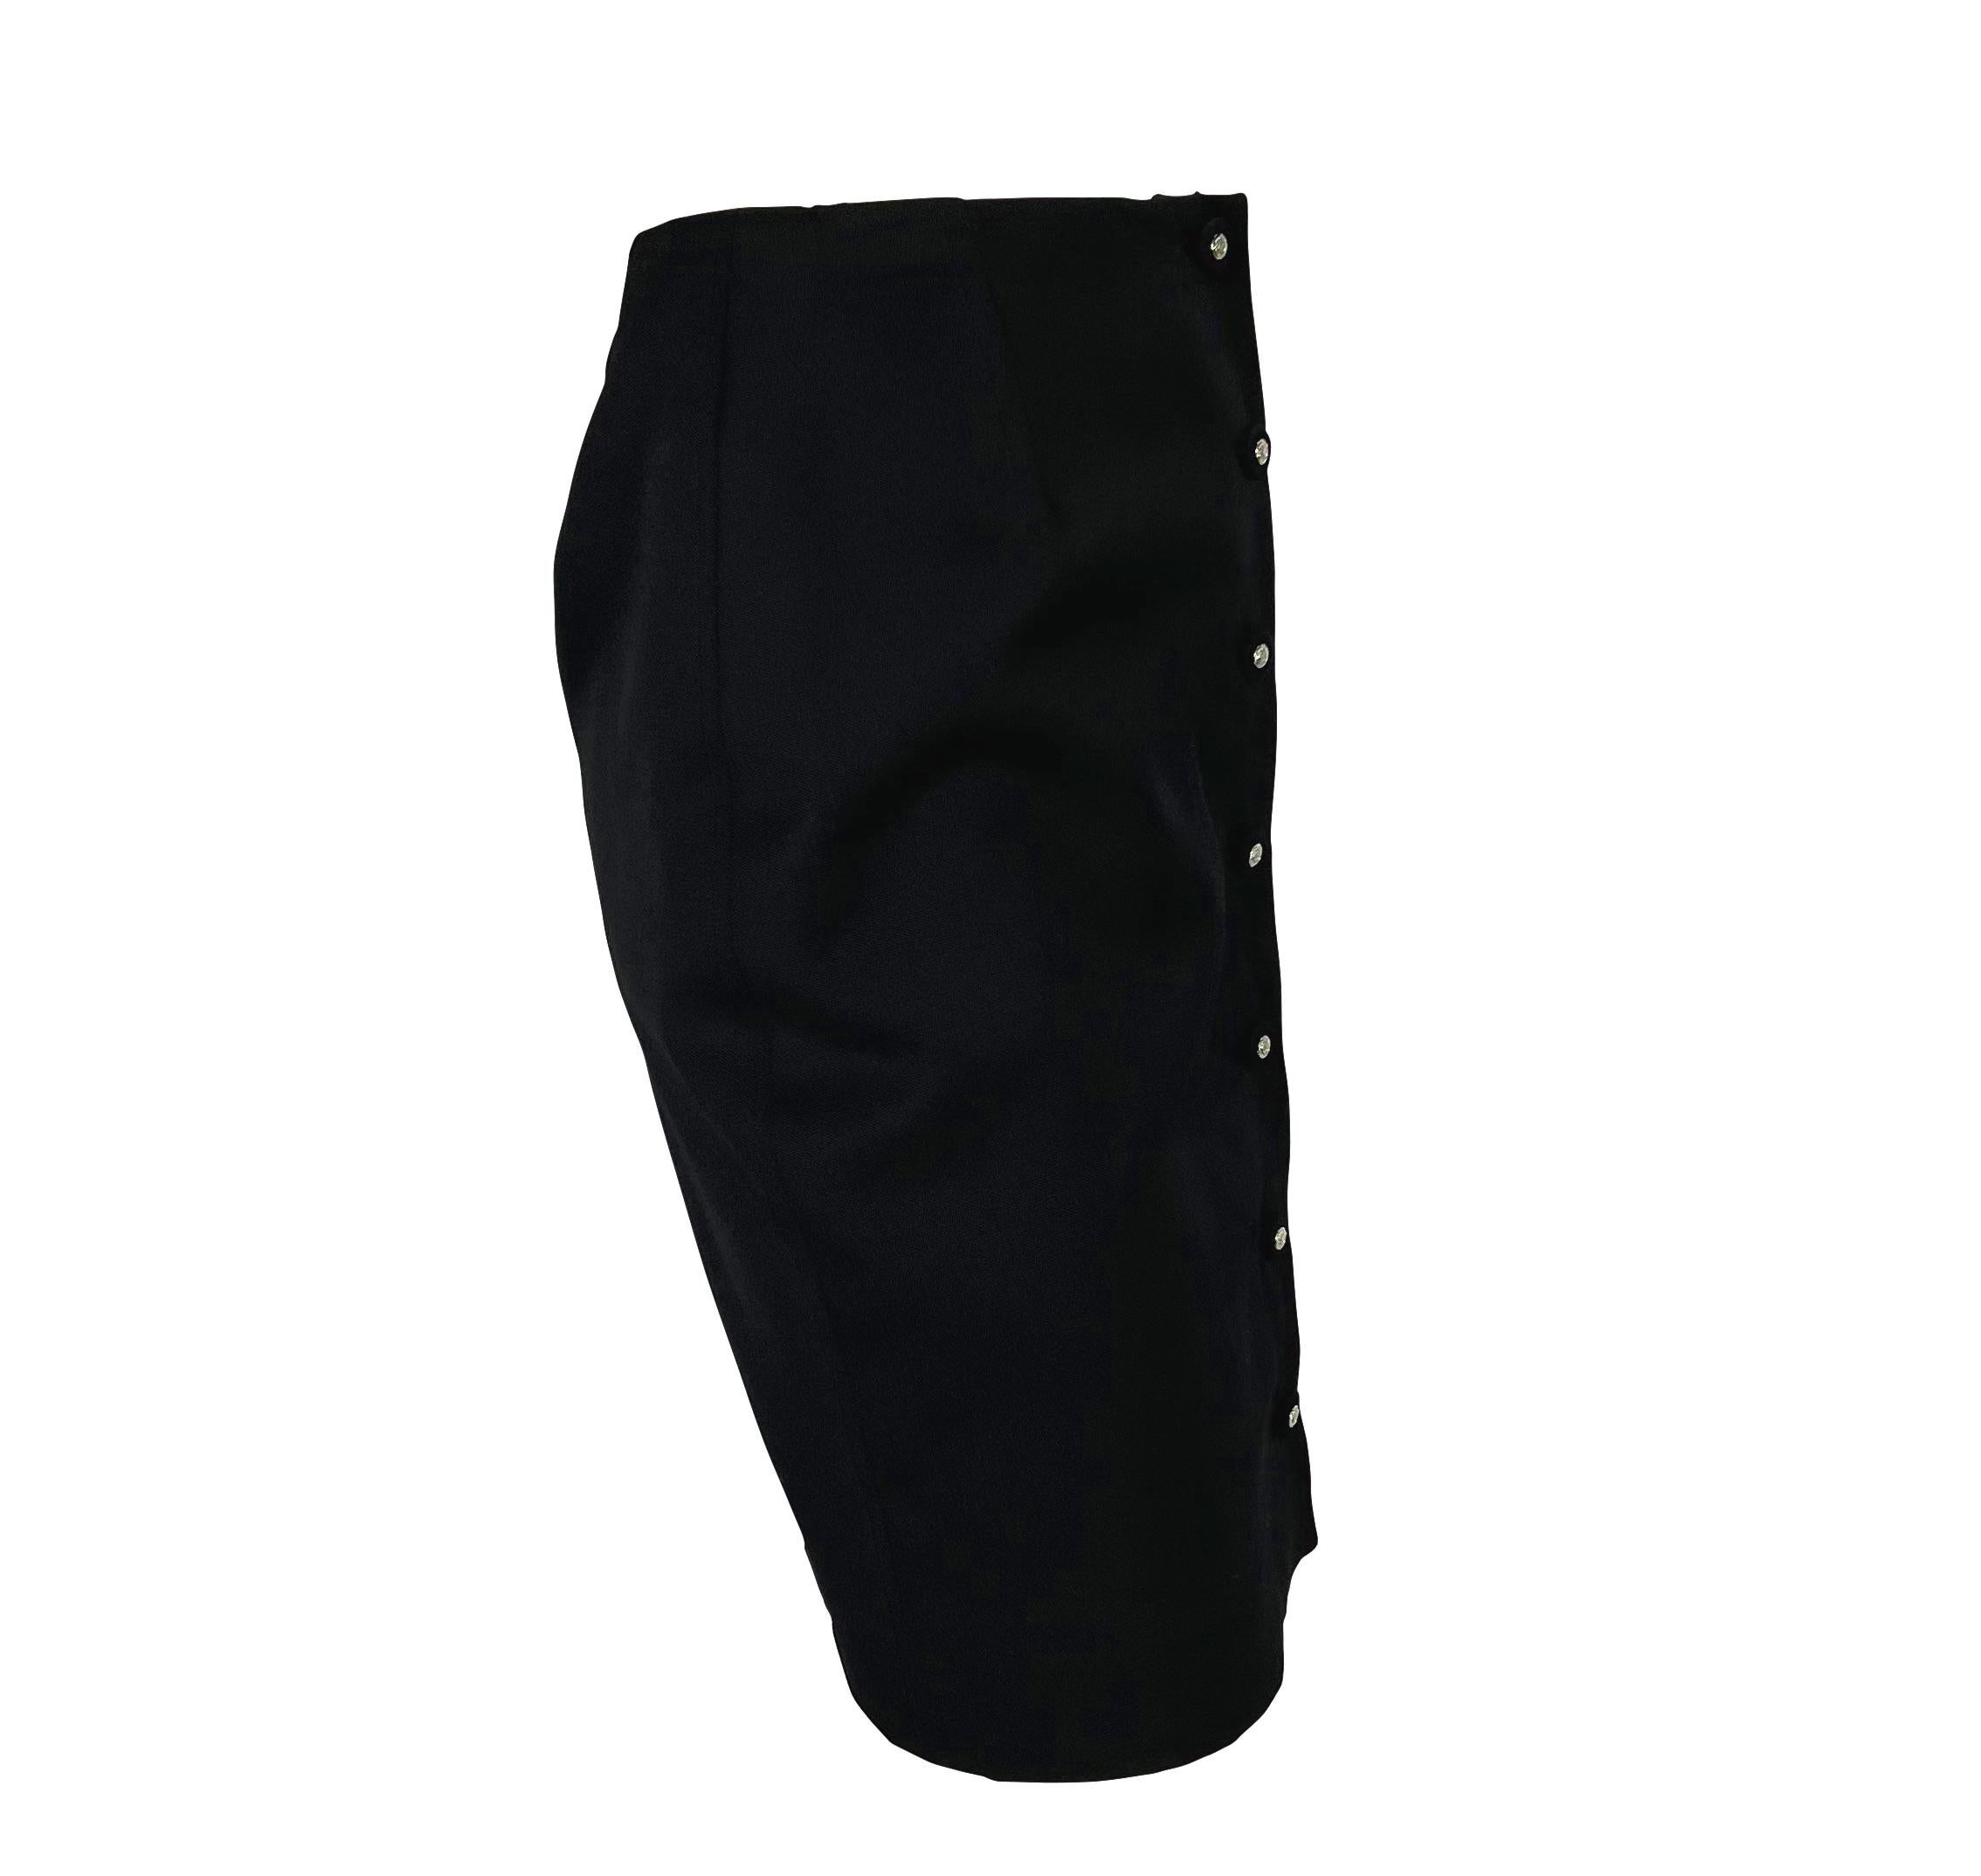 S/S 1996 Gianni Versace Couture Medusa Button Black Stretch Wool Mini Skirt For Sale 2